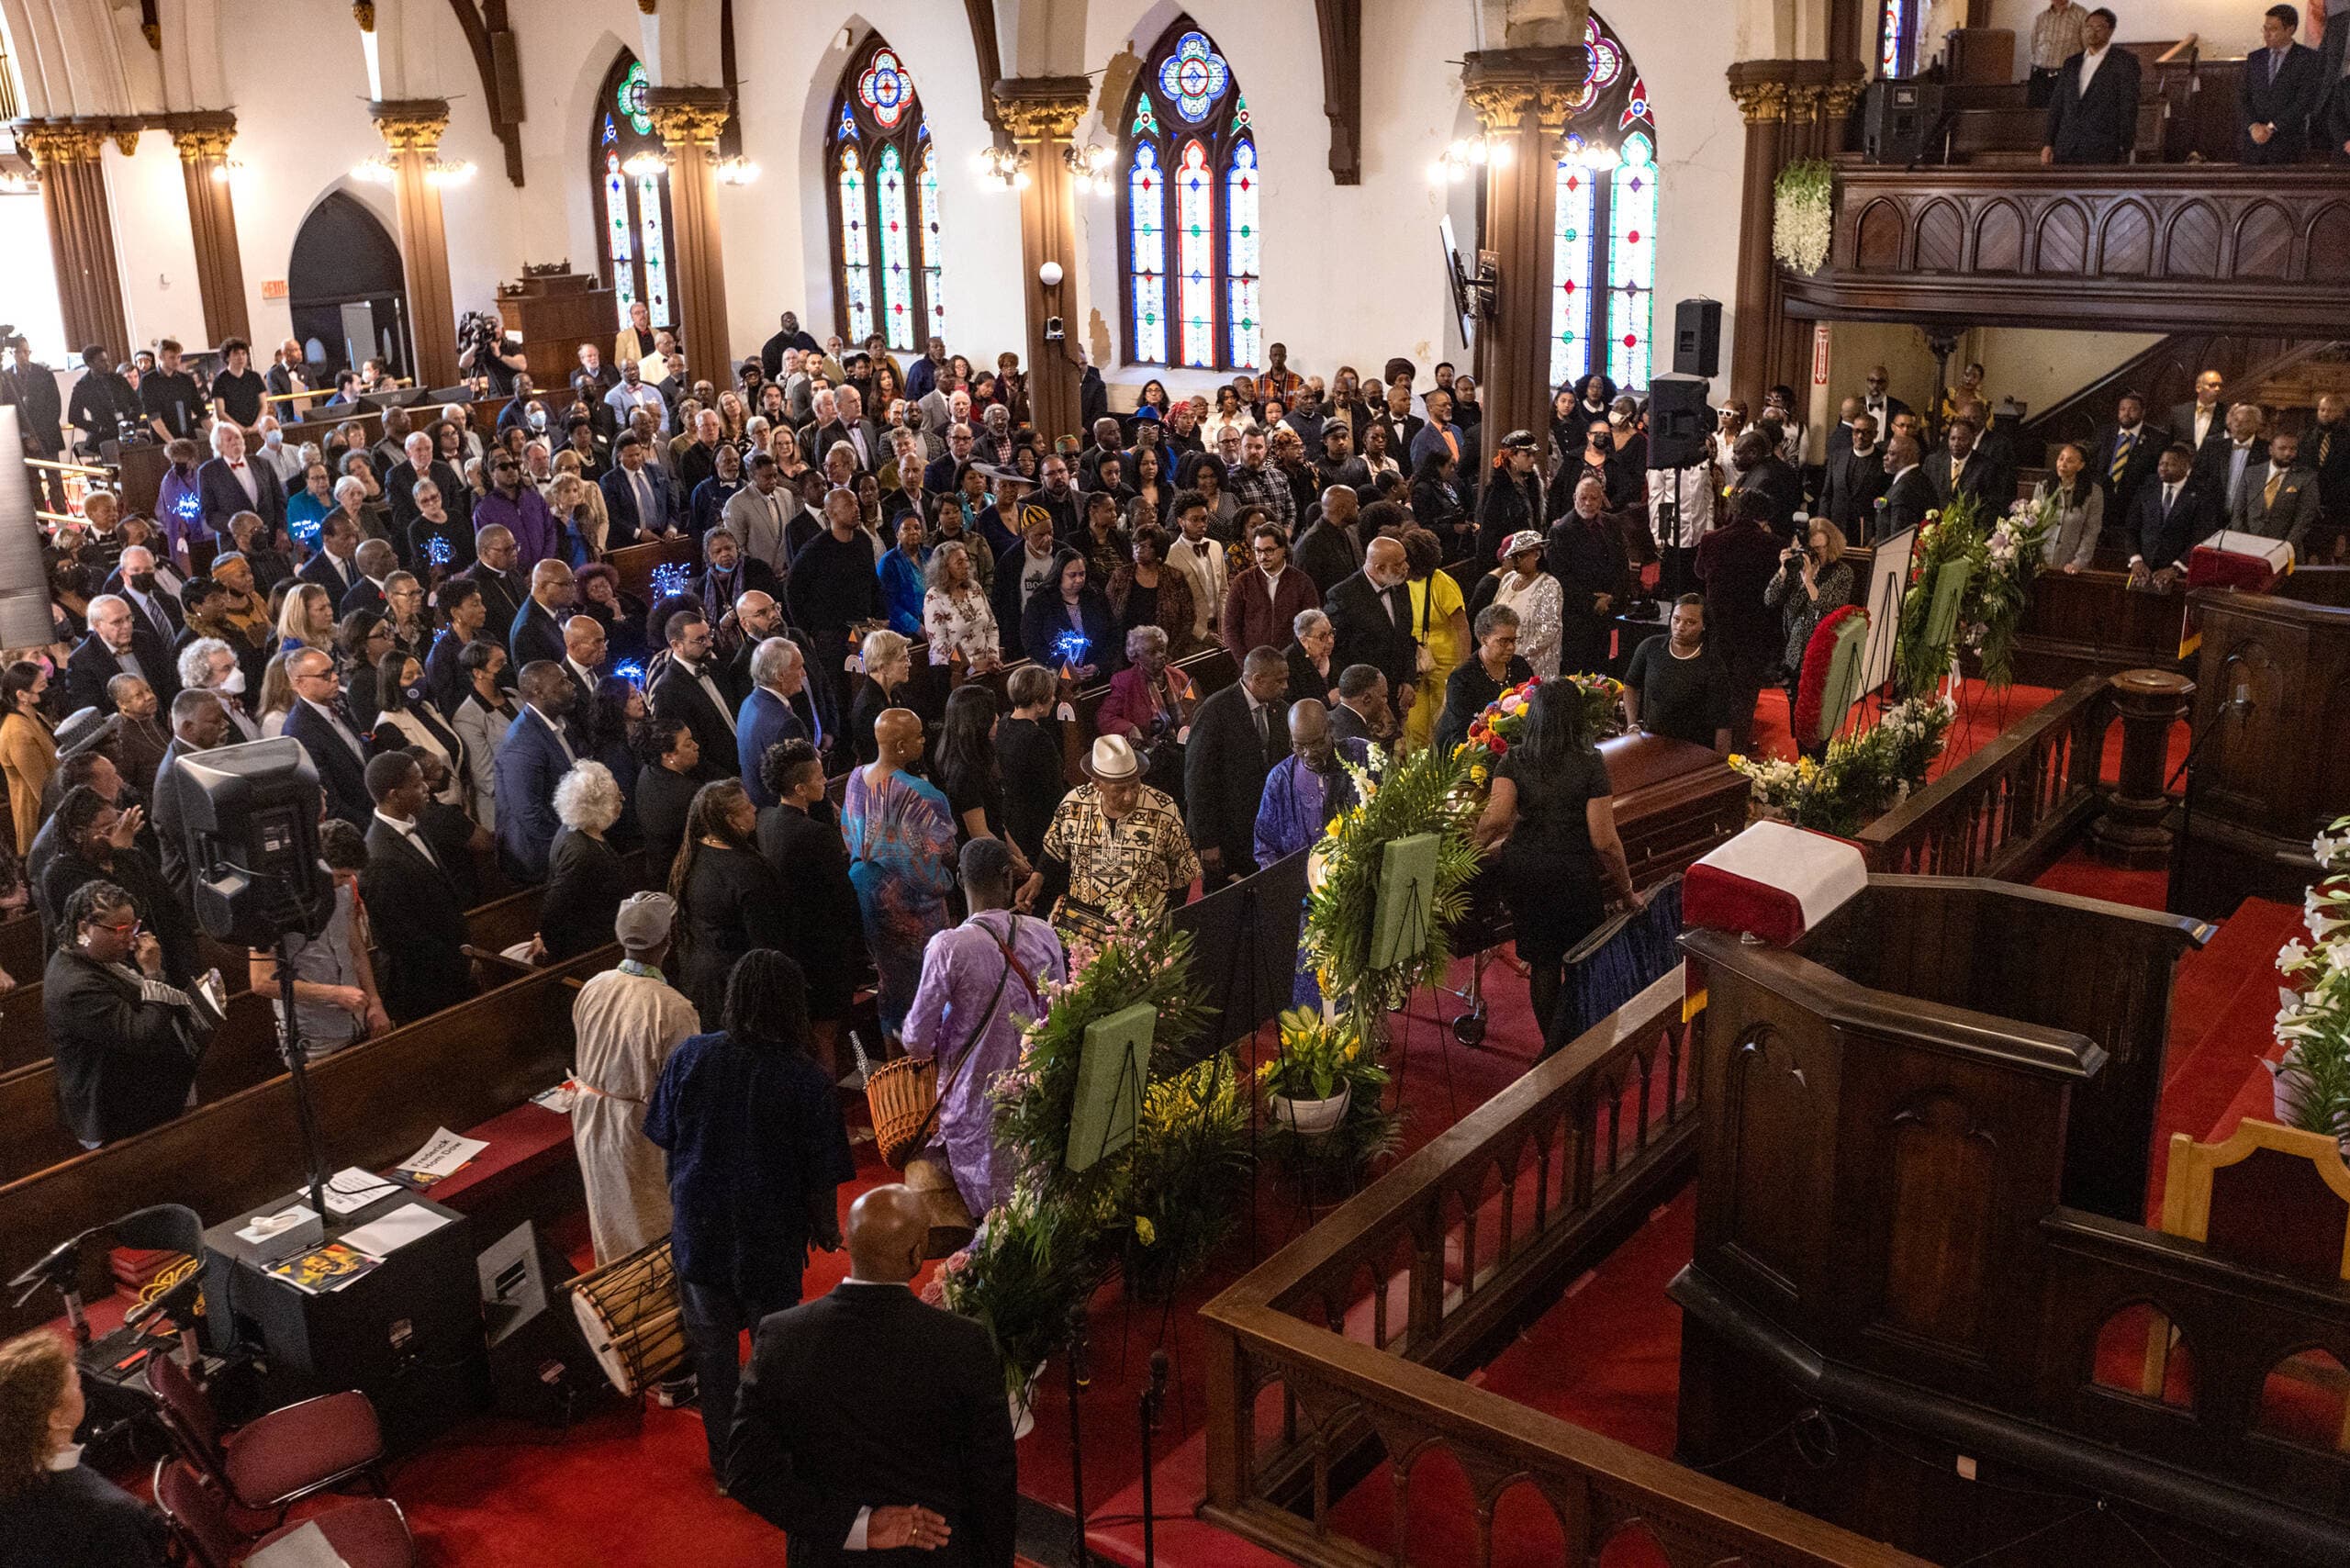 Pallbearers place the casket of Mel King at the front of the church for the funeral service at Union United Methodist Church in the South End. (Jesse Costa/WBUR)